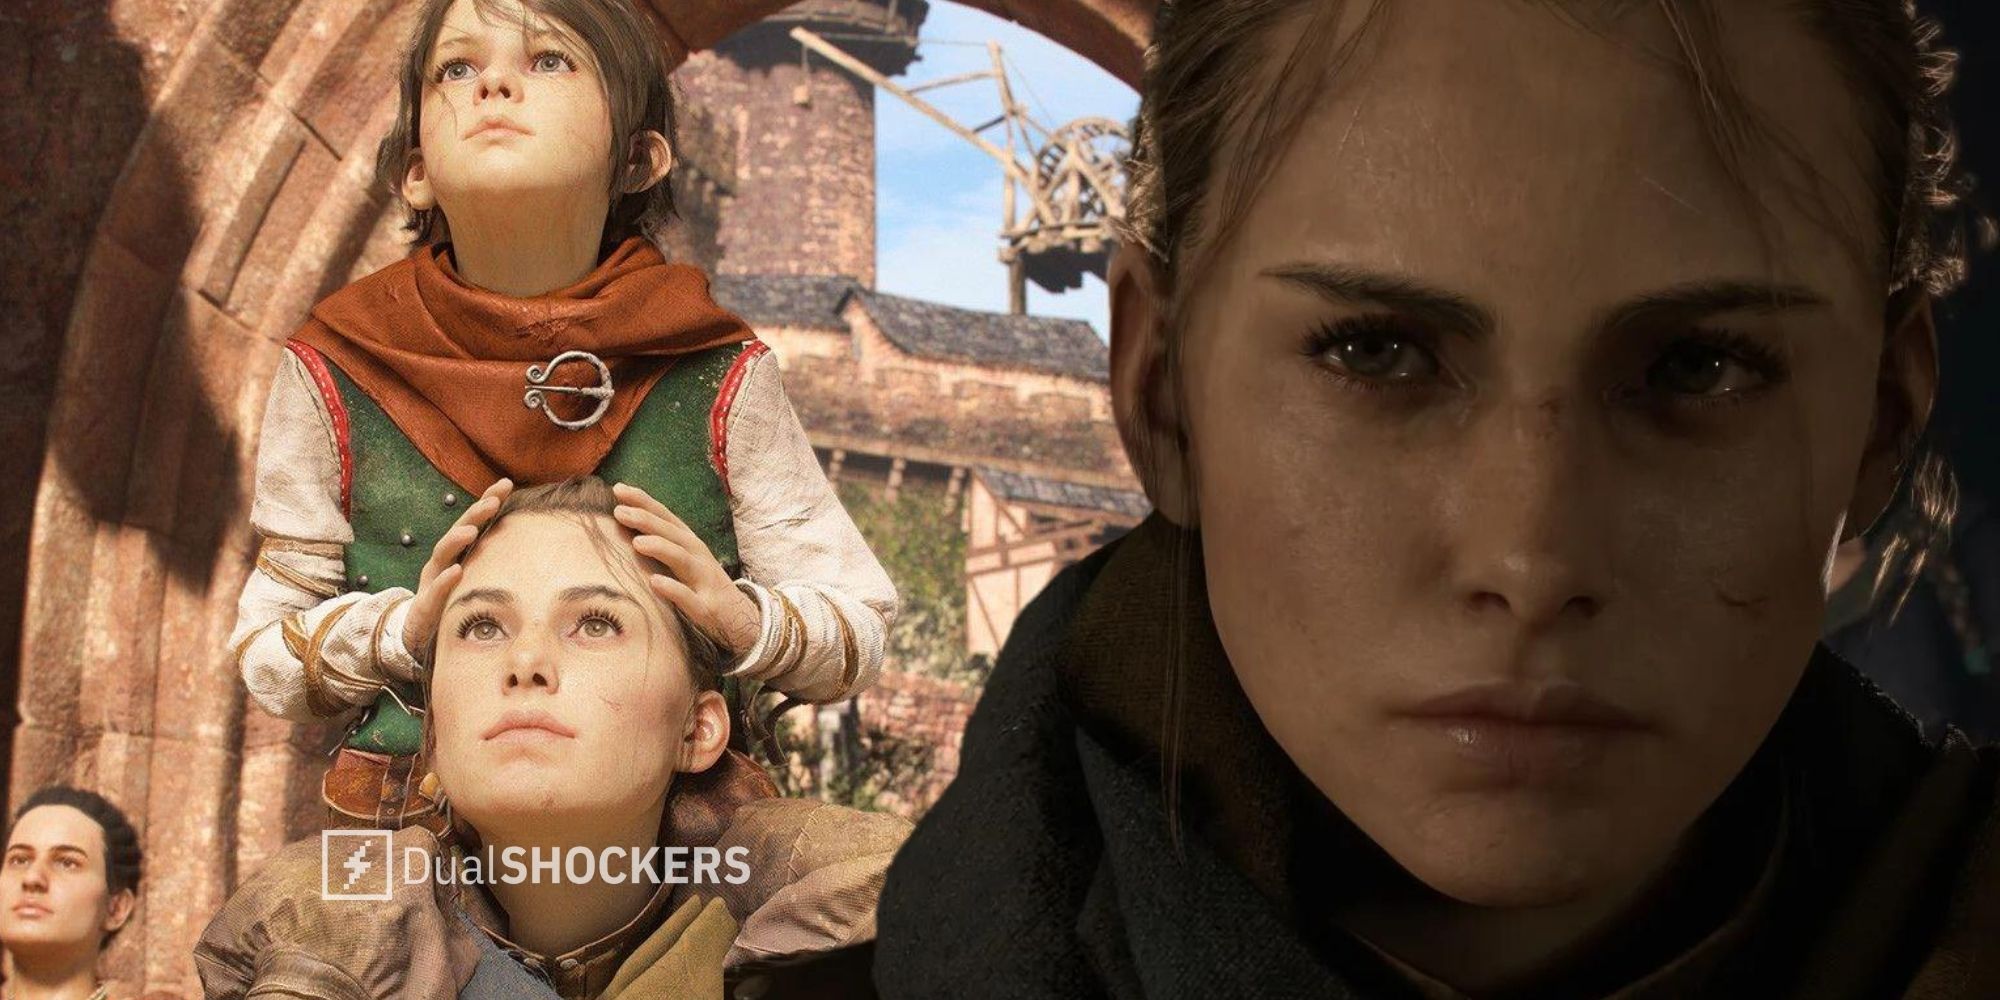 Report: A Plague Tale 3 Hinted at by New Job Listing